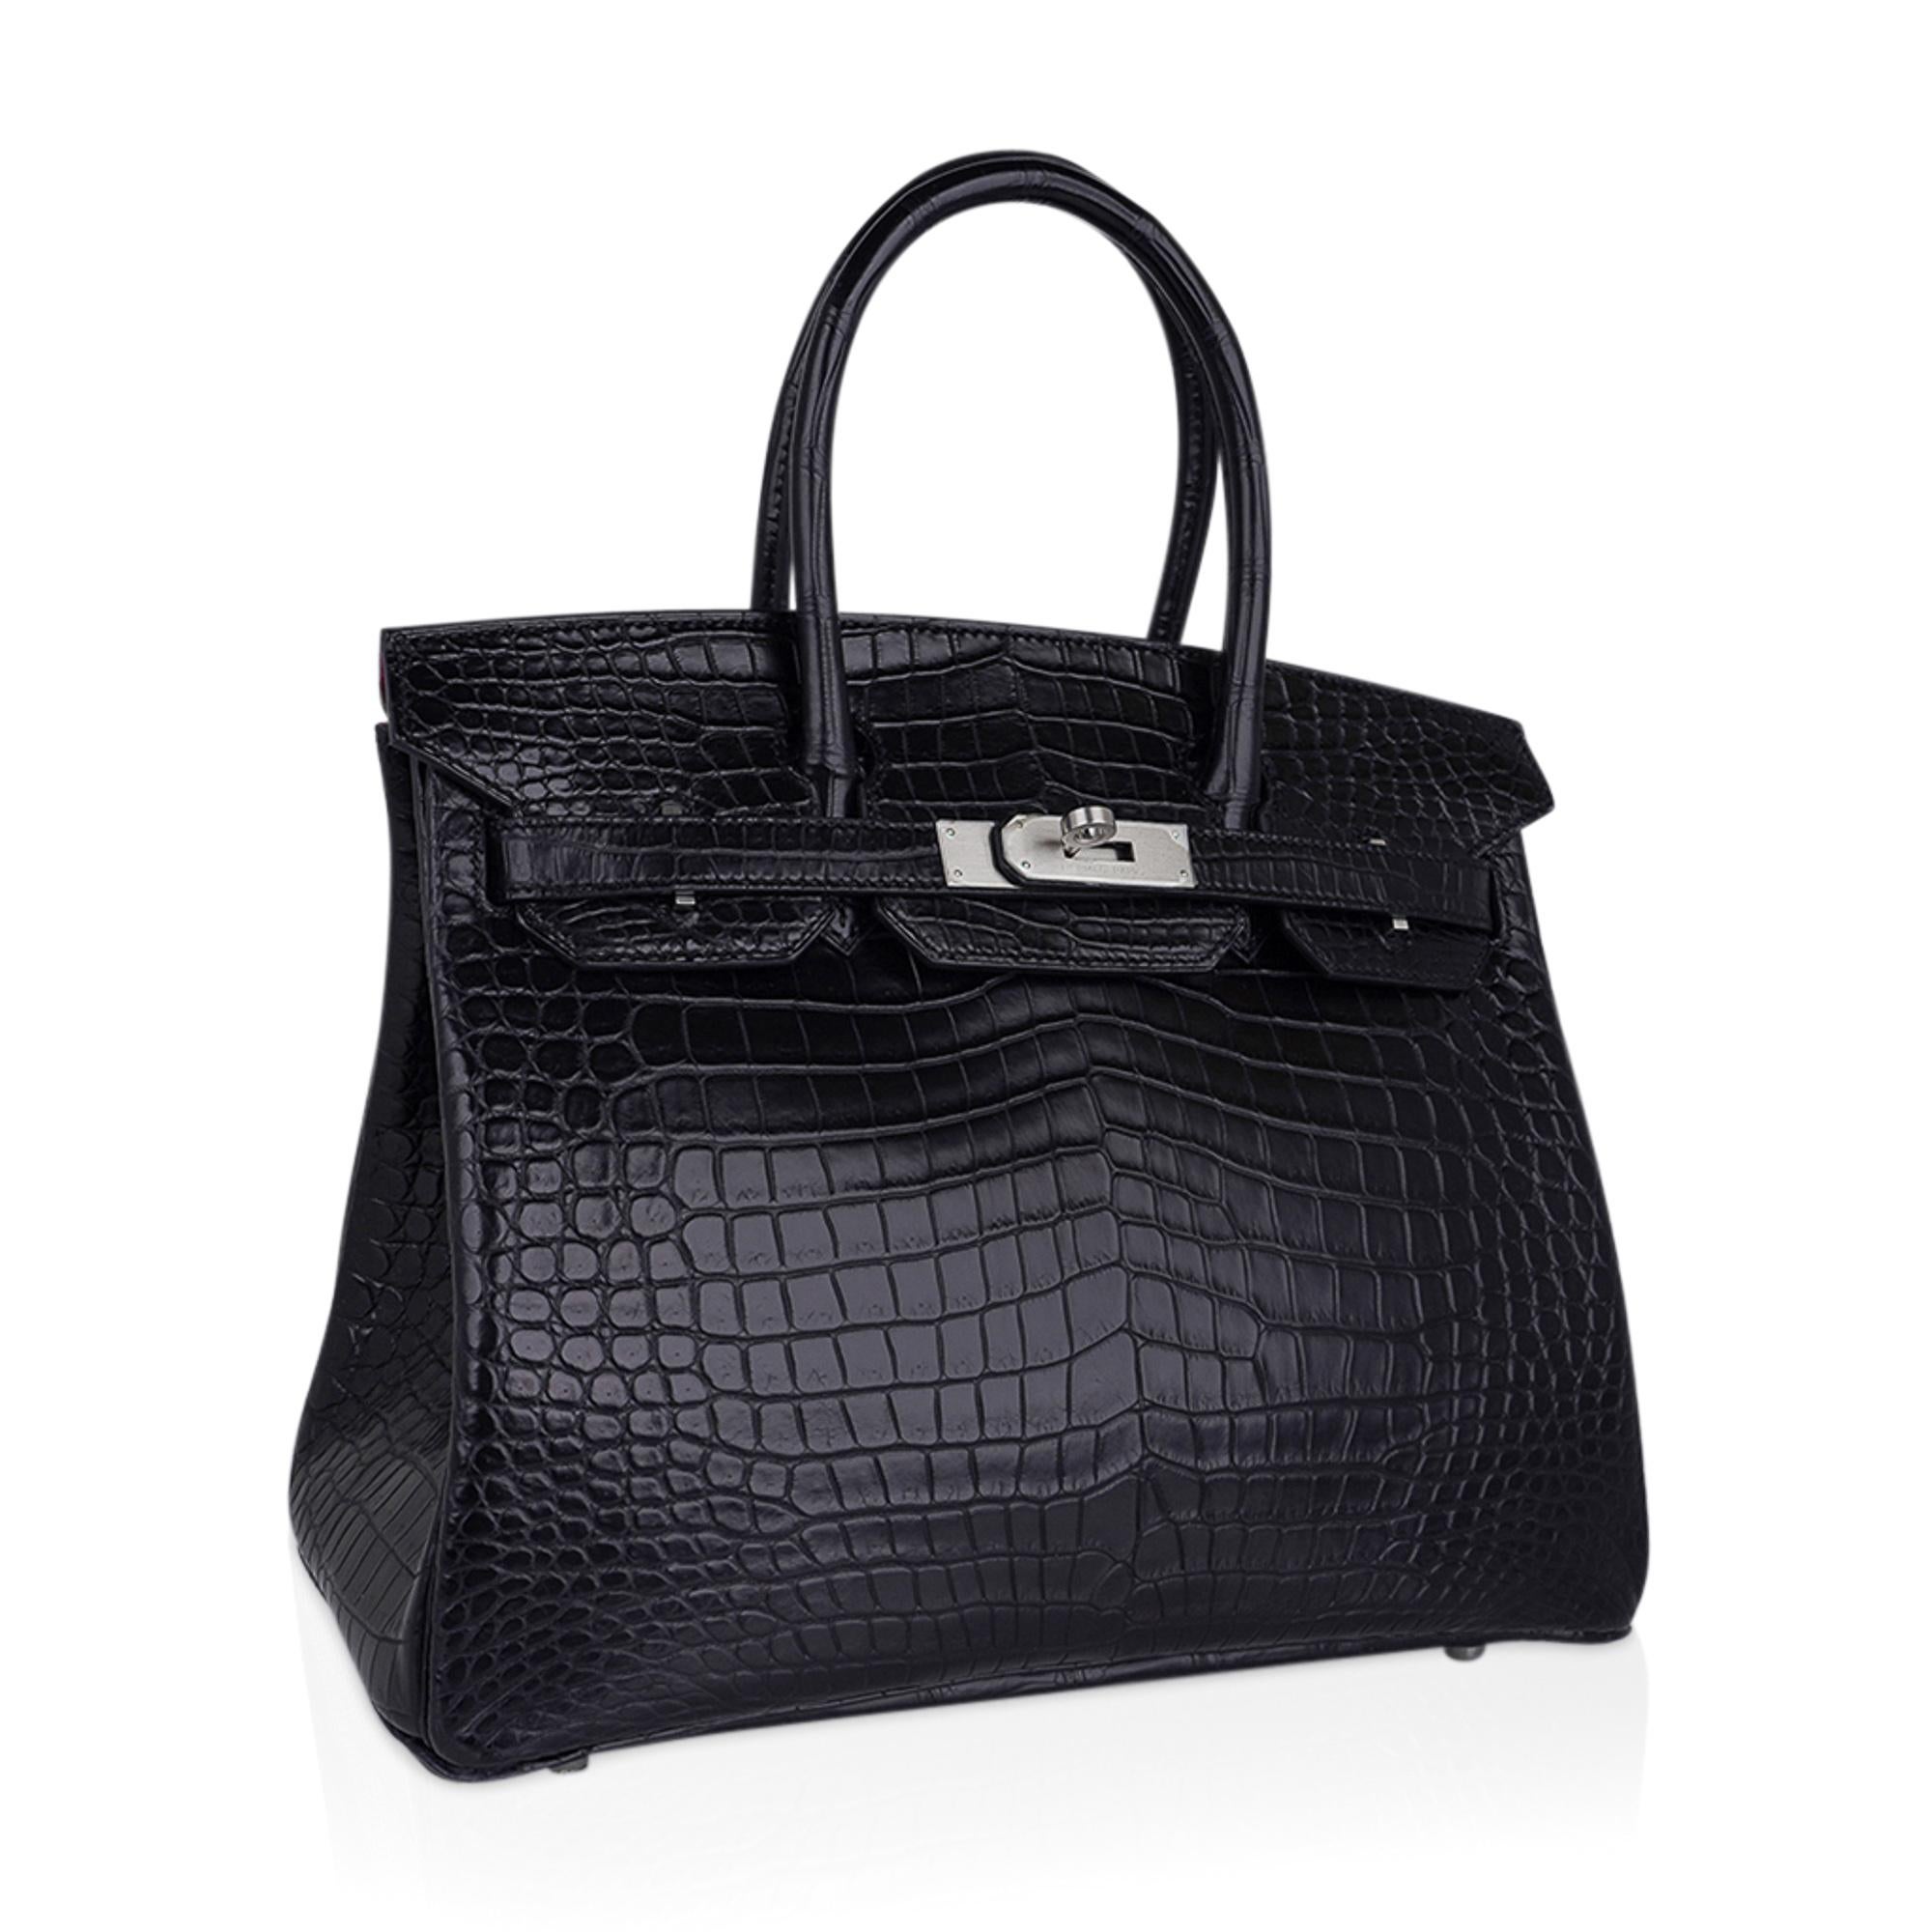 Mightychic offers an Hermes Birkin HSS 30 bag featured in Black matte Porosus Crocodile.
Striking with the Rose Pourpre pop of colour when you open your treasure!
Accentuated with subtle brushed palladium hardware.
Classic and timeless this